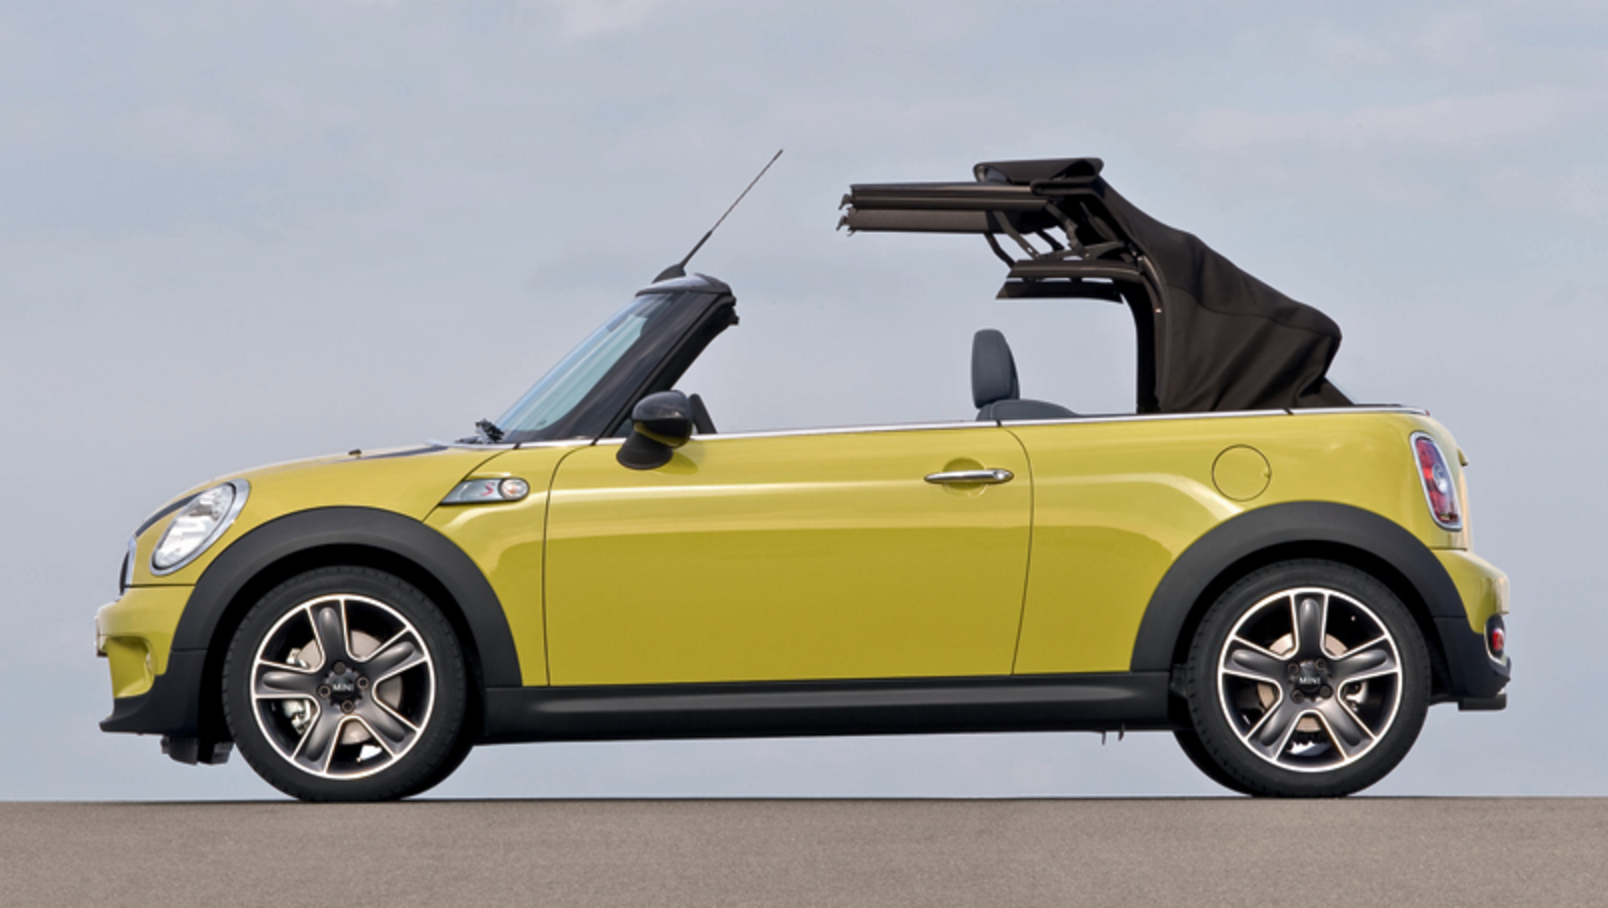 MINI COOPER CONVERTIBLE-"THE HAPPY PUPPY" | Blog for all the CAR ...